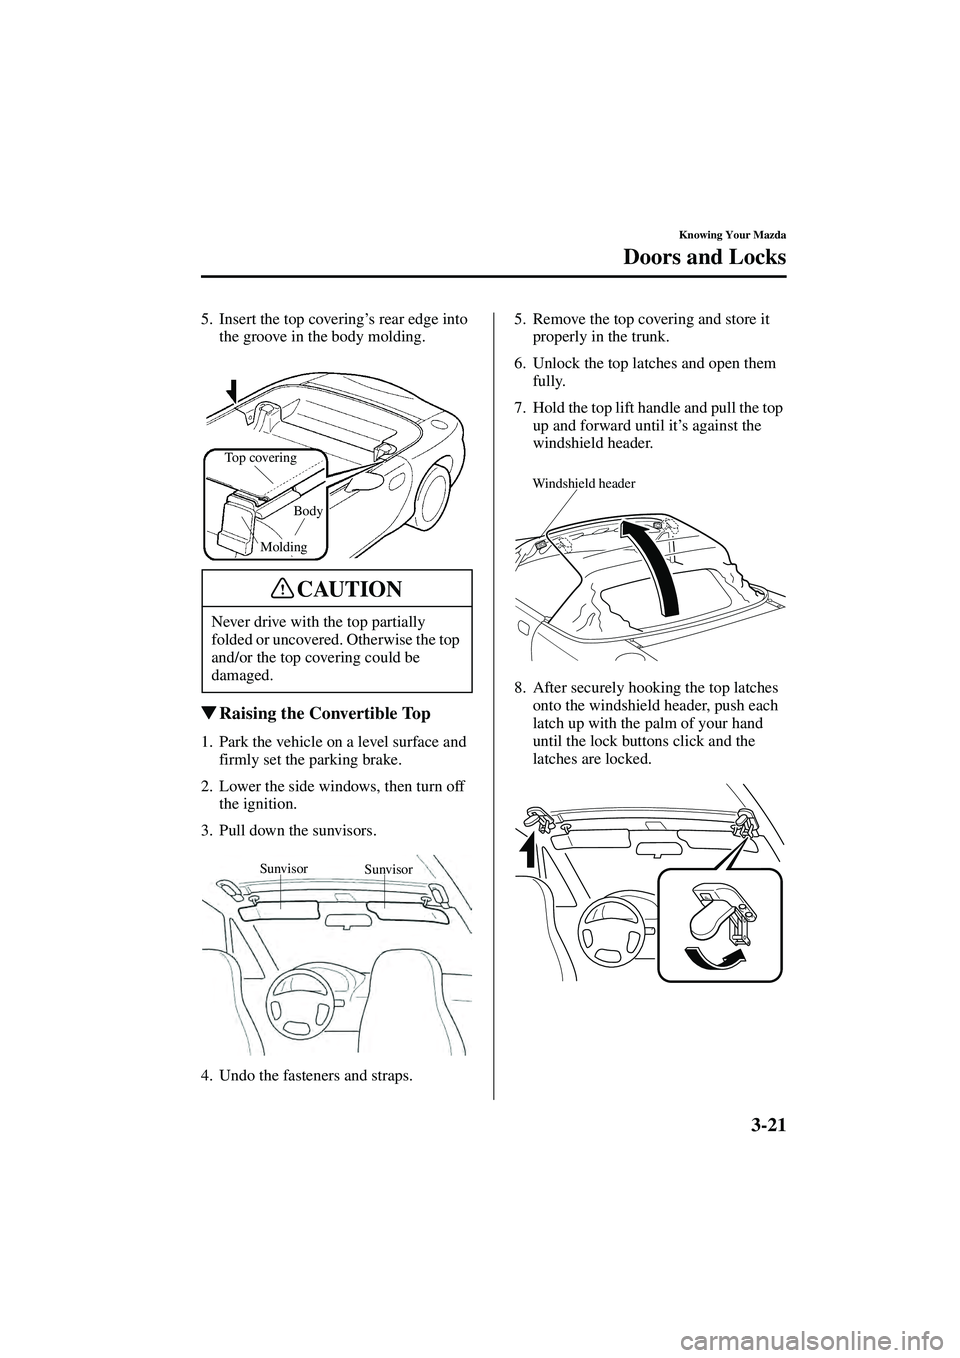 MAZDA MODEL MX-5 MIATA 2004  Owners Manual 3-21
Knowing Your Mazda
Doors and Locks
Form No. 8S15-EA-03G
5. Insert the top covering’s rear edge into 
the groove in the body molding.
 Raising the Convertible Top
1. Park the vehicle on a level